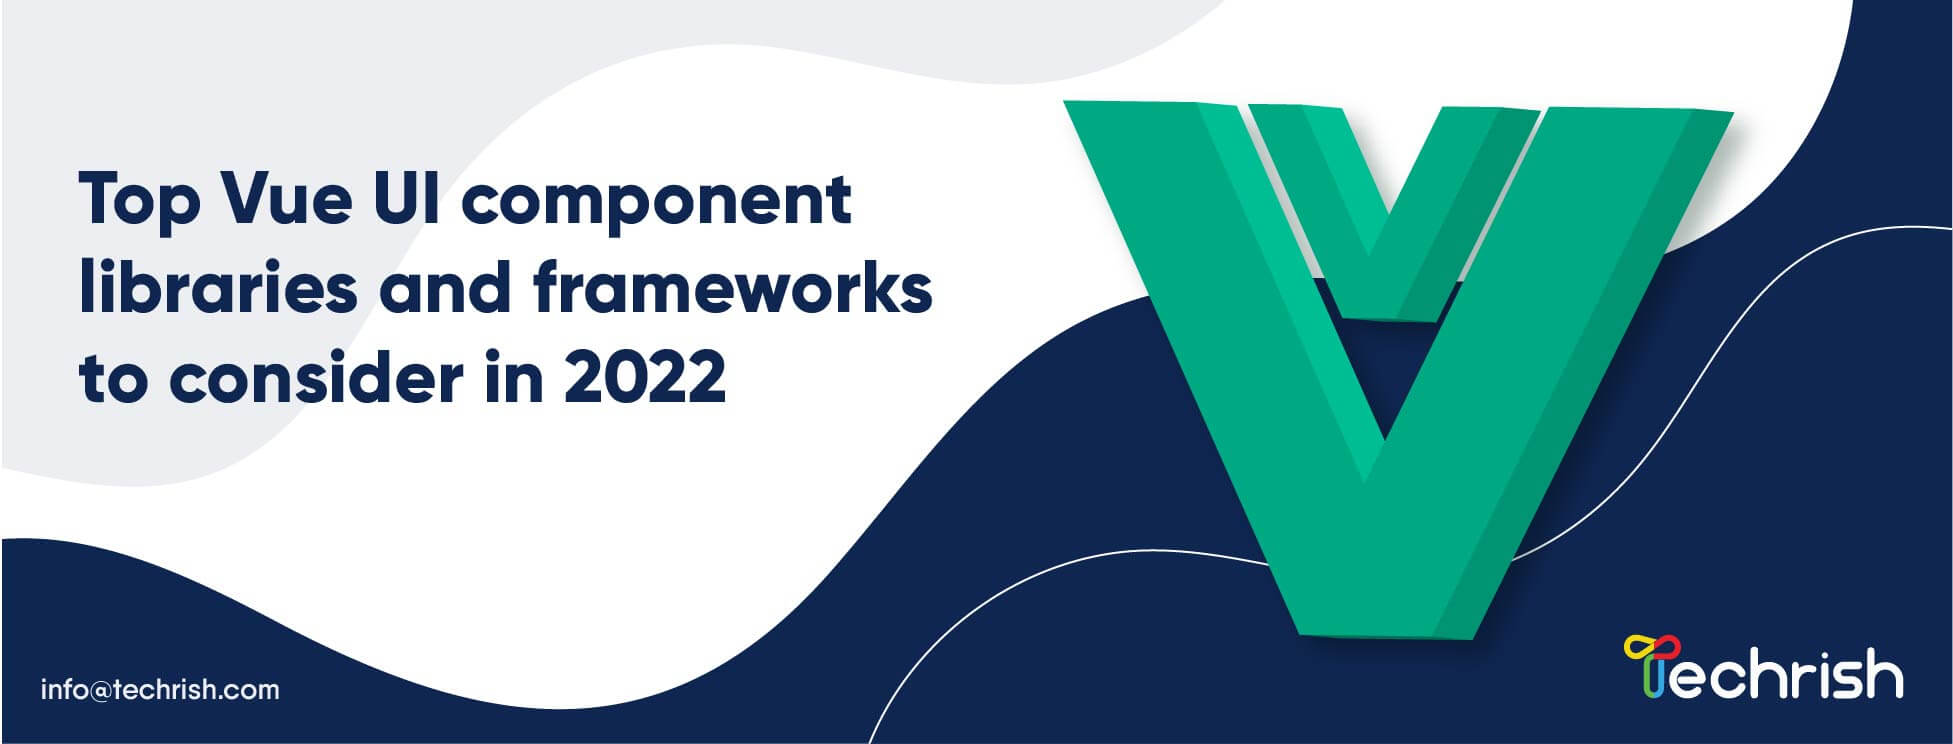 Top  Vue UI component libraries and frameworks that you can use in 2022.